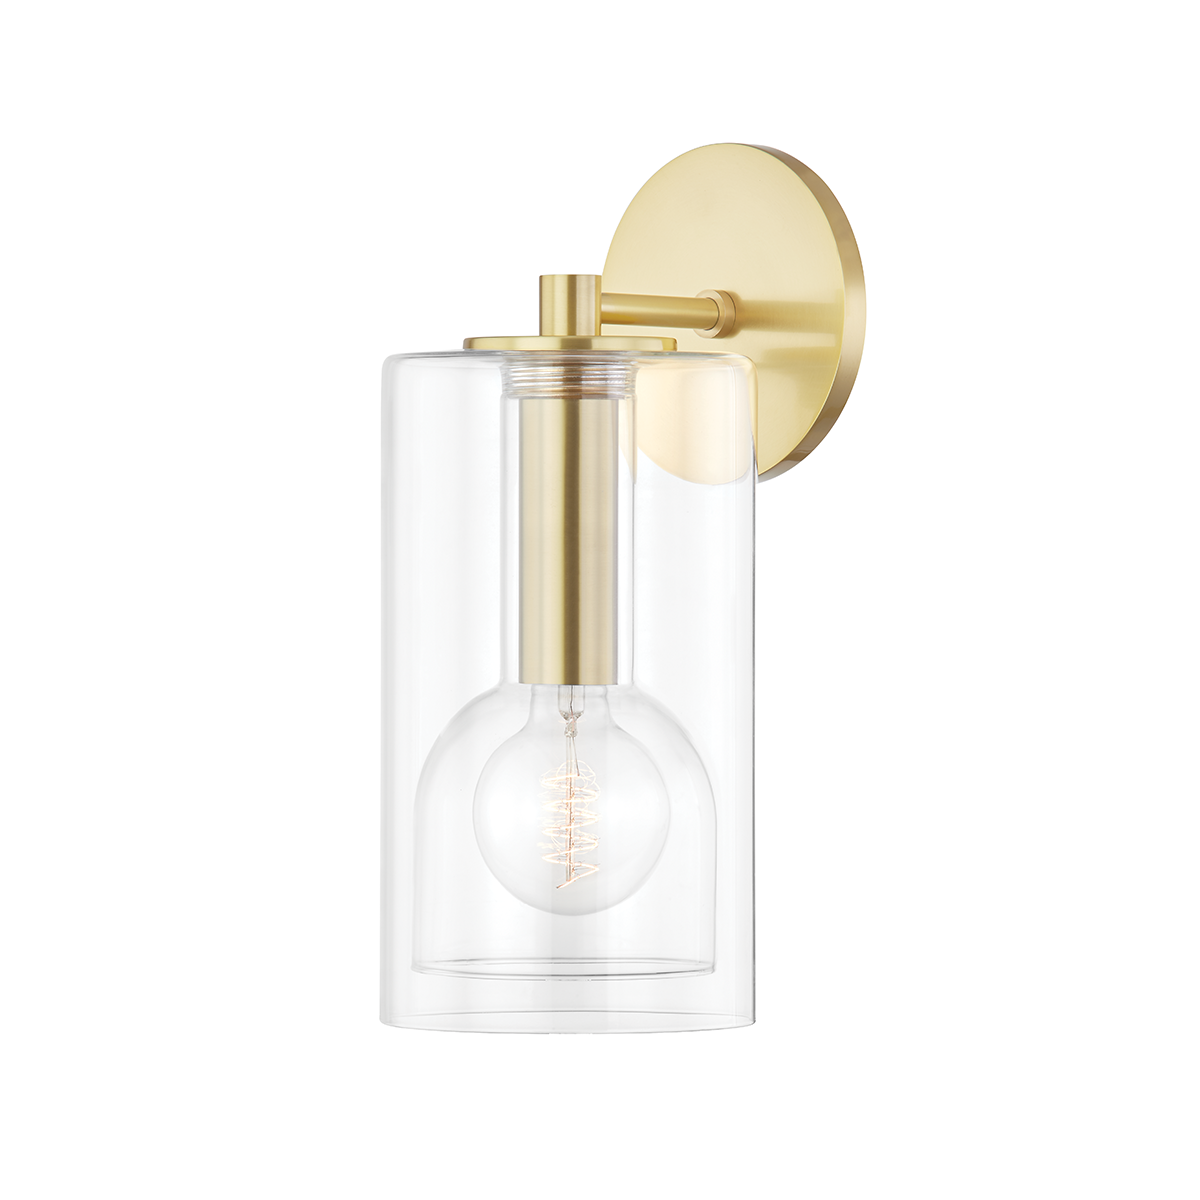 Belinda 1 Light Wall Sconce-Mitzi-HVL-H415101A-AGB-Outdoor Wall SconcesAged Brass-6"-1-France and Son